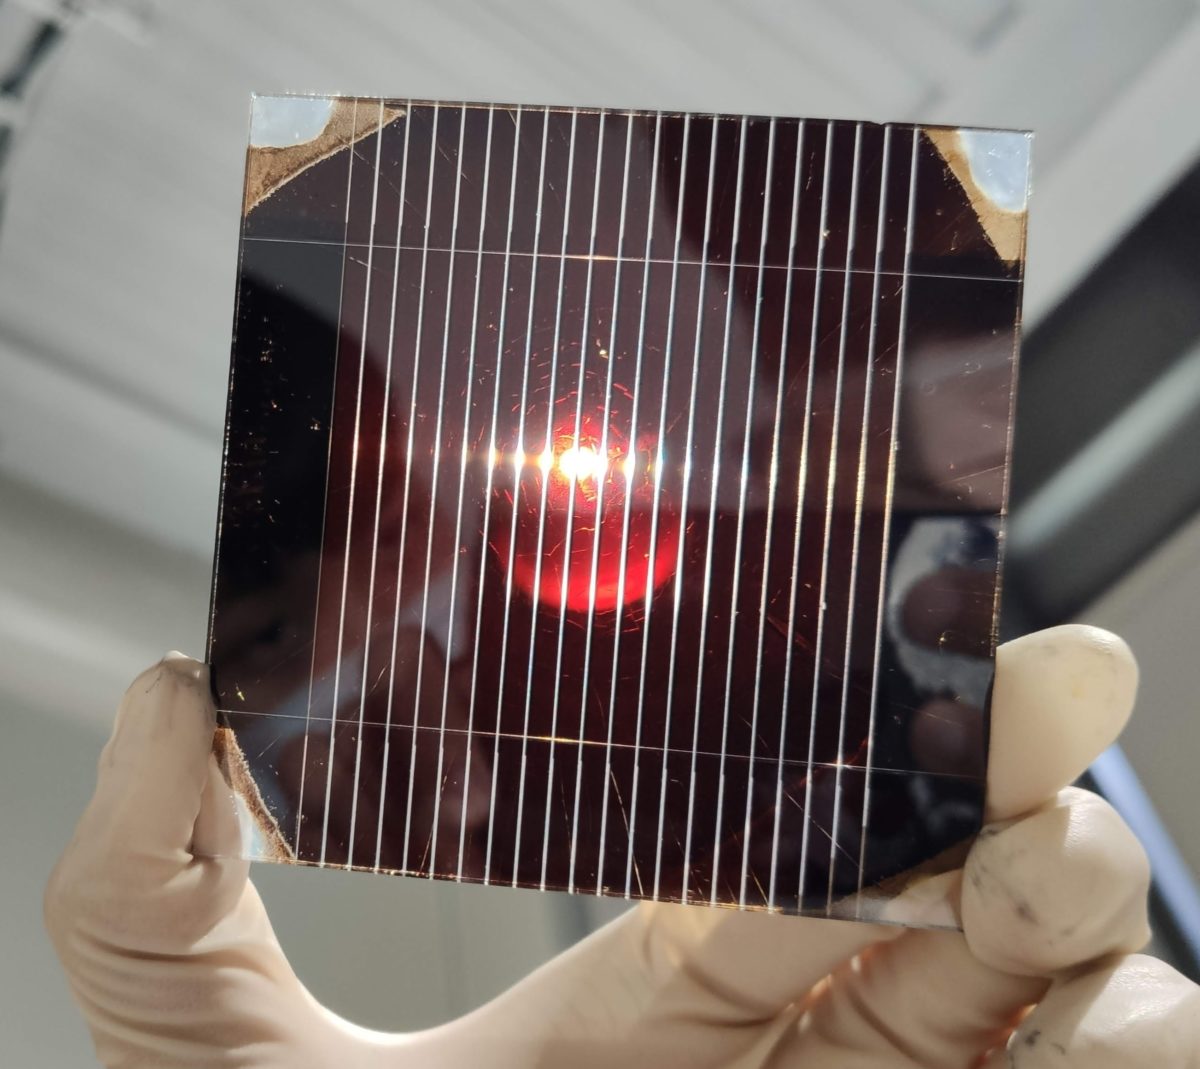 Controlling the crystals for a 17.96% efficient perovskite solar cell